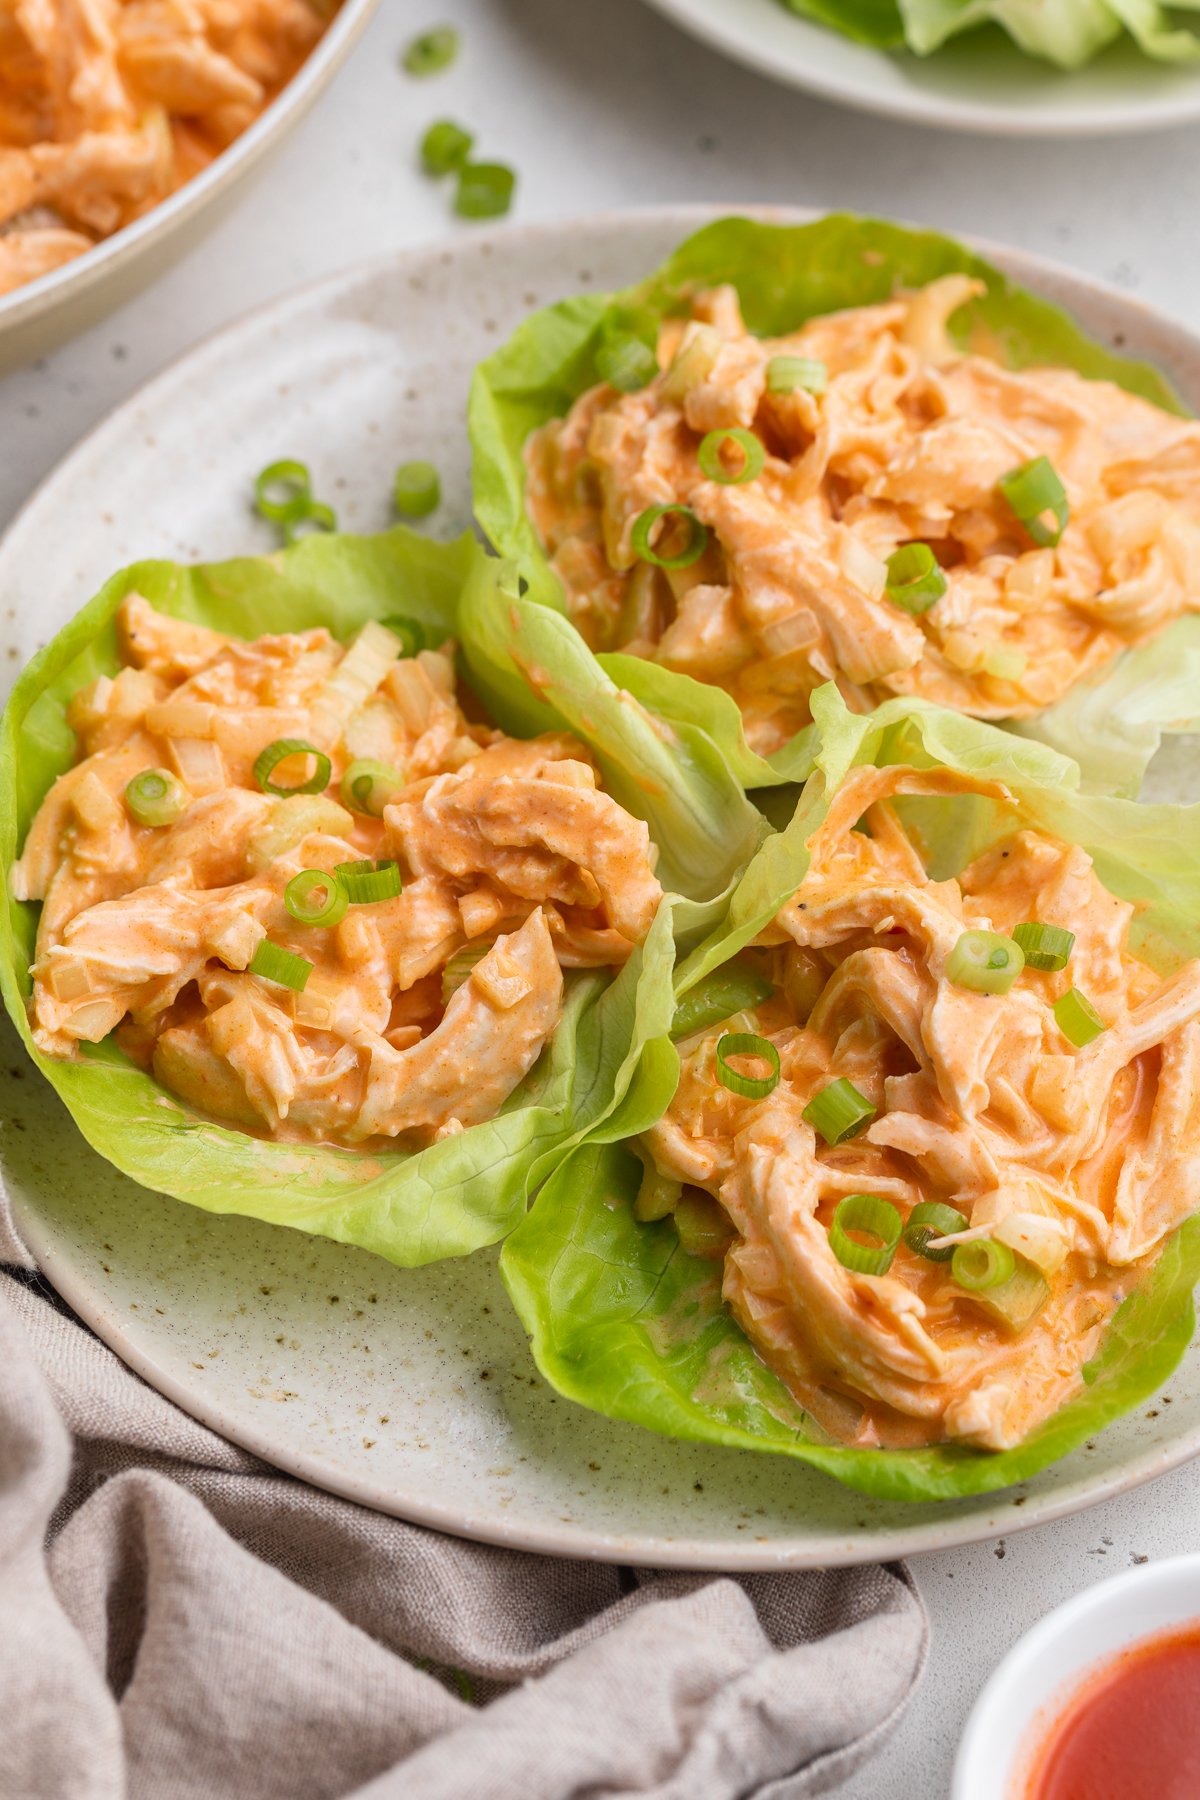 Whole30 buffalo chicken salad scooped into three iceberg lettuce cups on a white plate.